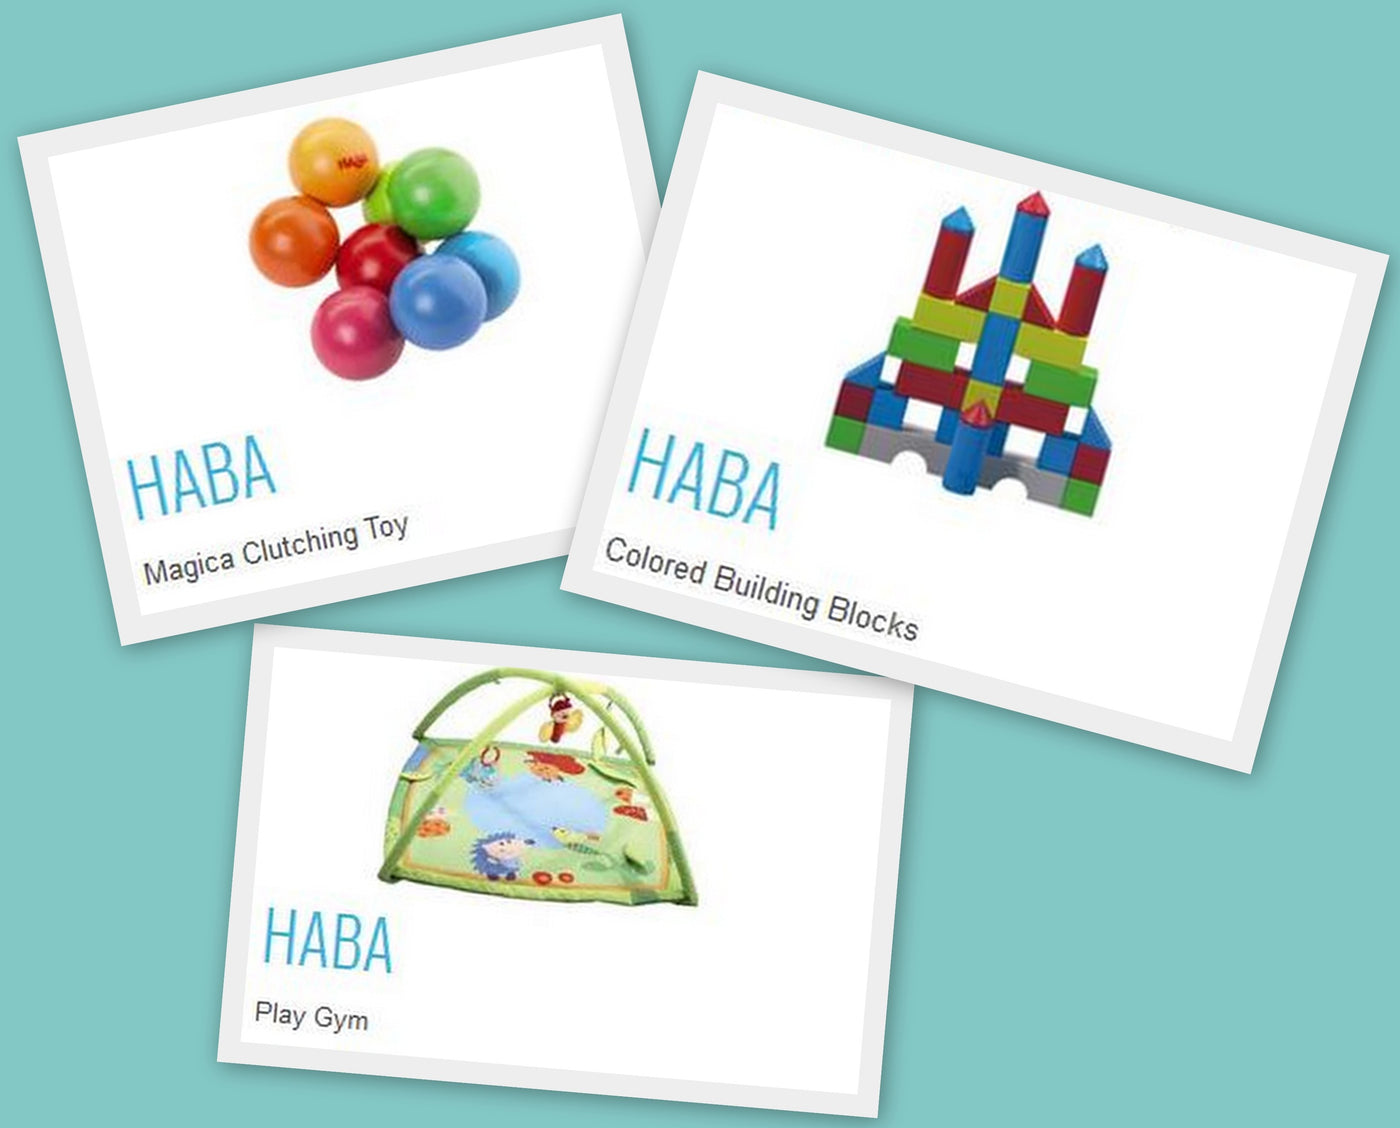 Three HABA Items Nominated for Cribsie Awards Sponsored by Diapers.com